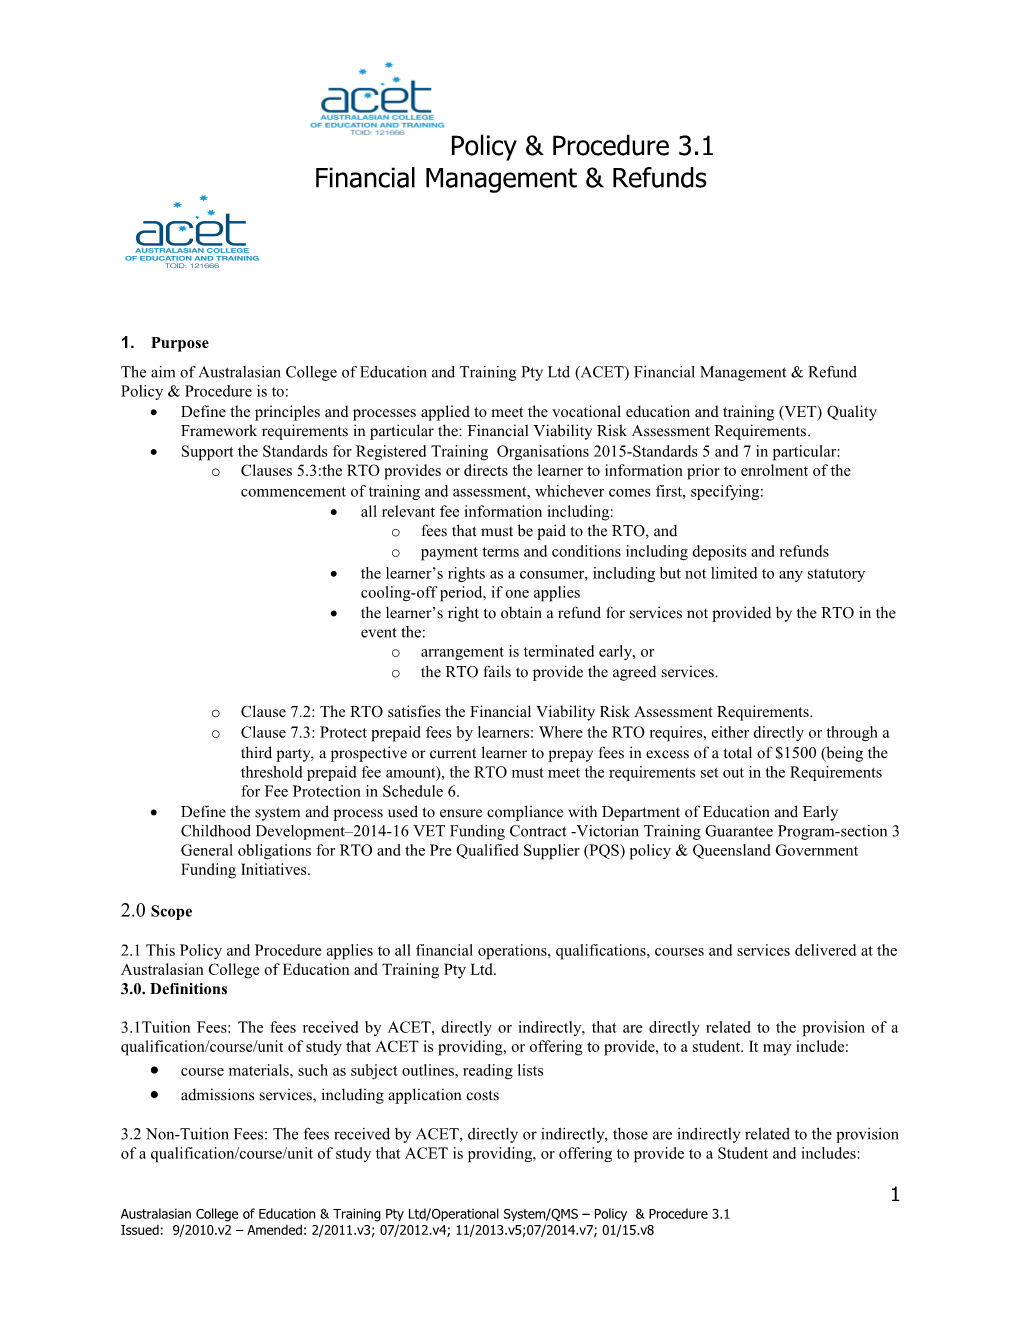 Policy & Procedure 3.1 Financial Management & Refunds